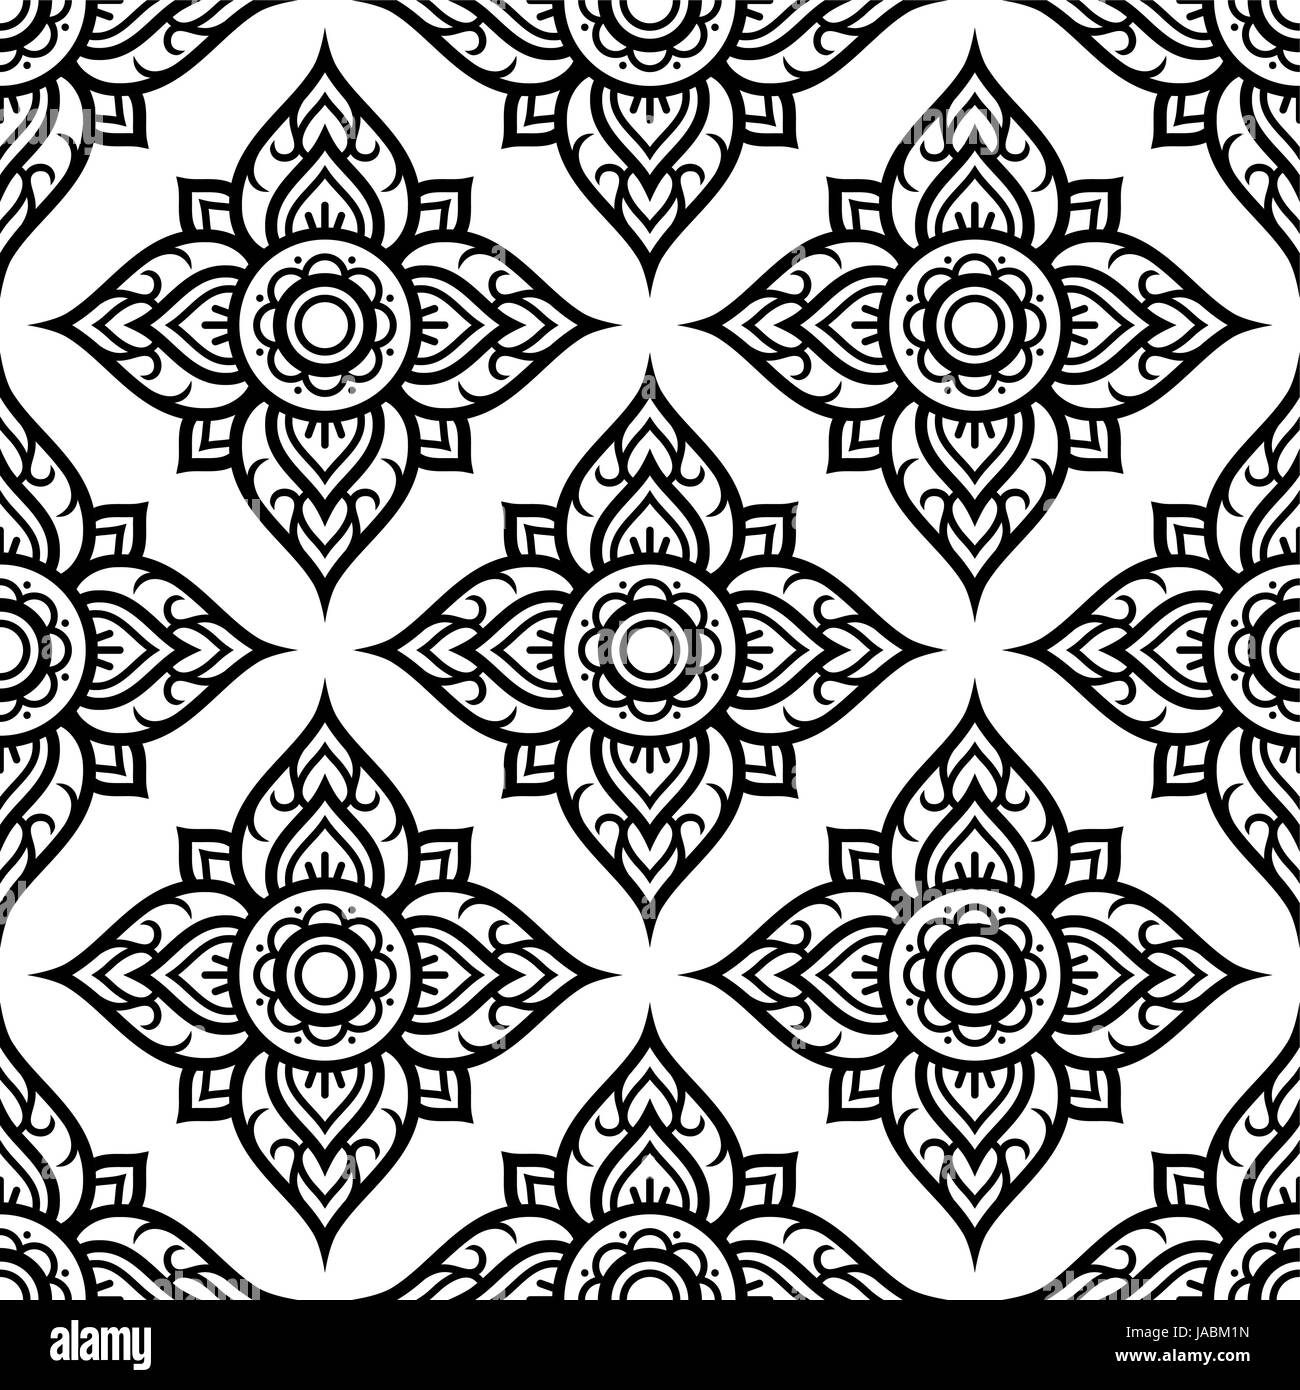 Floral seamless pattern inspired by traditional art form Thailand Stock Vector